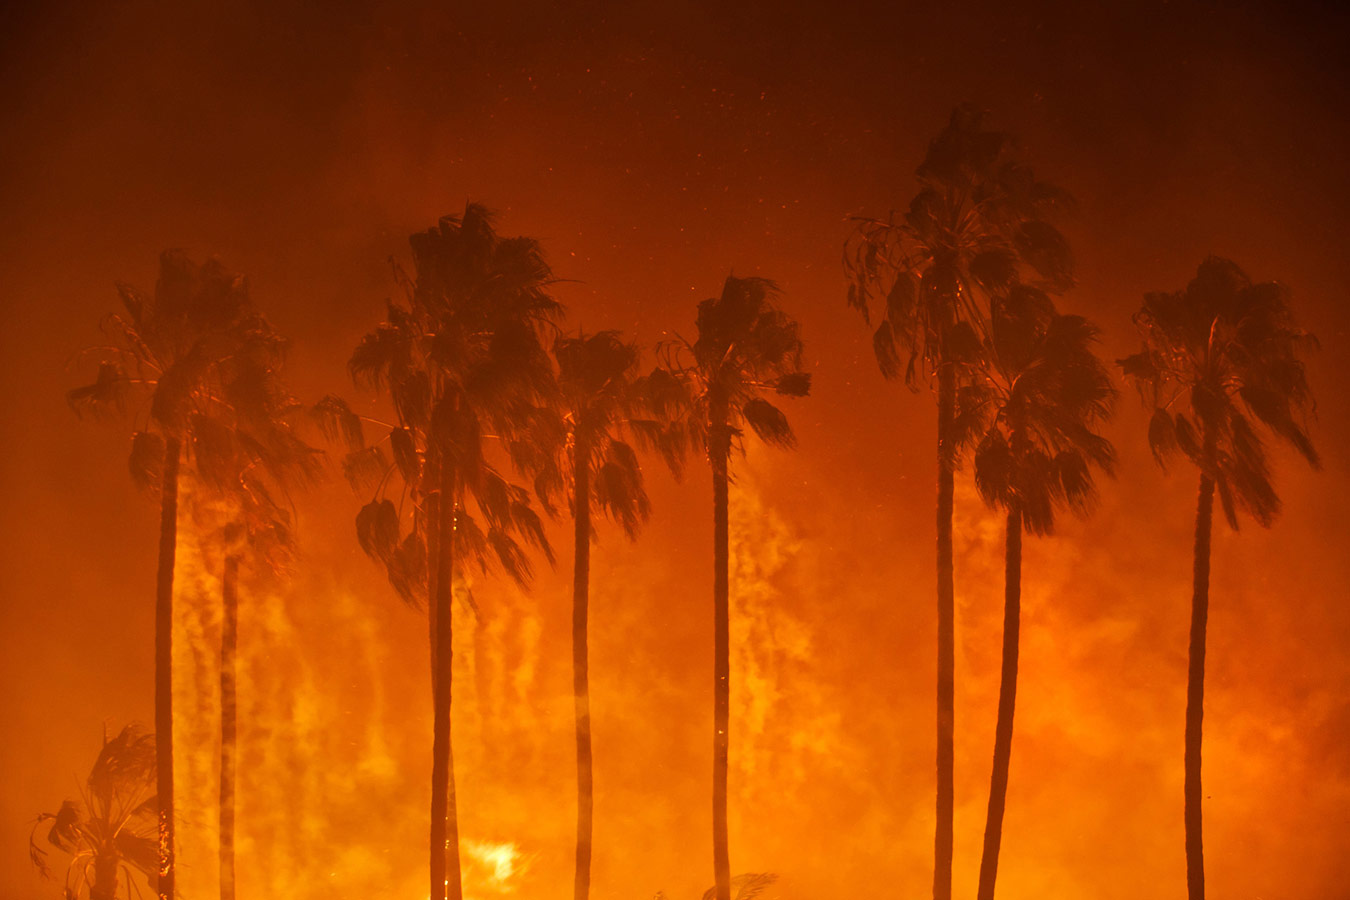 California Burns, © Marcus Yam / Los Angeles Times, United States, Story Nature & Environment 1st Prize, Istanbul Photo Awards